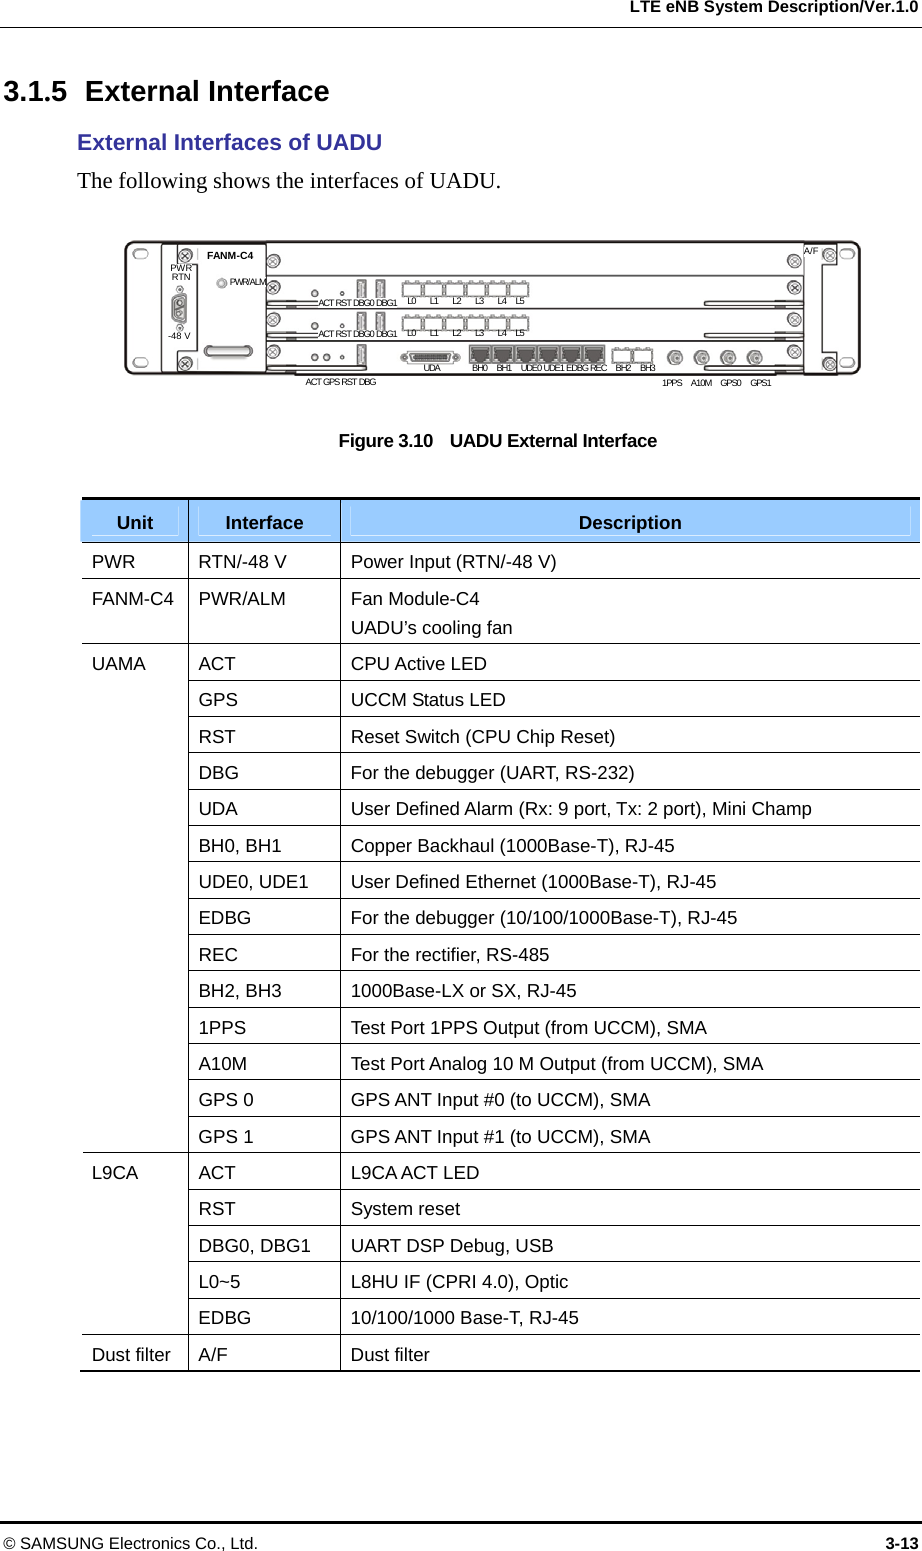  LTE eNB System Description/Ver.1.0 3.1.5 External Interface External Interfaces of UADU The following shows the interfaces of UADU.  ACT RST DBG0 DBG1 L0   L1   L2   L3   L4  L5     -48 VA/F ACT RST DBG0 DBG1 L0   L1   L2   L3   L4  L5     PWR/ALM PWRRTN UDA       BH0  BH1  UDE0 UDE1 EDBG REC  BH2  BH3 FANM-C4 ACT GPS RST DBG 1PPS  A10M  GPS0  GPS1  Figure 3.10    UADU External Interface  Unit Interface Description PWR RTN/-48 V  Power Input (RTN/-48 V) FANM-C4 PWR/ALM Fan Module-C4 UADU’s cooling fan ACT CPU Active LED GPS UCCM Status LED RST Reset Switch (CPU Chip Reset) DBG  For the debugger (UART, RS-232) UDA User Defined Alarm (Rx: 9 port, Tx: 2 port), Mini Champ BH0, BH1 Copper Backhaul (1000Base-T), RJ-45 UDE0, UDE1 User Defined Ethernet (1000Base-T), RJ-45 EDBG  For the debugger (10/100/1000Base-T), RJ-45 REC  For the rectifier, RS-485 BH2, BH3 1000Base-LX or SX, RJ-45 1PPS Test Port 1PPS Output (from UCCM), SMA A10M Test Port Analog 10 M Output (from UCCM), SMA GPS 0 GPS ANT Input #0 (to UCCM), SMA UAMA GPS 1 GPS ANT Input #1 (to UCCM), SMA ACT L9CA ACT LED RST System reset DBG0, DBG1 UART DSP Debug, USB L0~5 L8HU IF (CPRI 4.0), Optic L9CA EDBG 10/100/1000 Base-T, RJ-45 Dust filter   A/F Dust filter  © SAMSUNG Electronics Co., Ltd.  3-13 